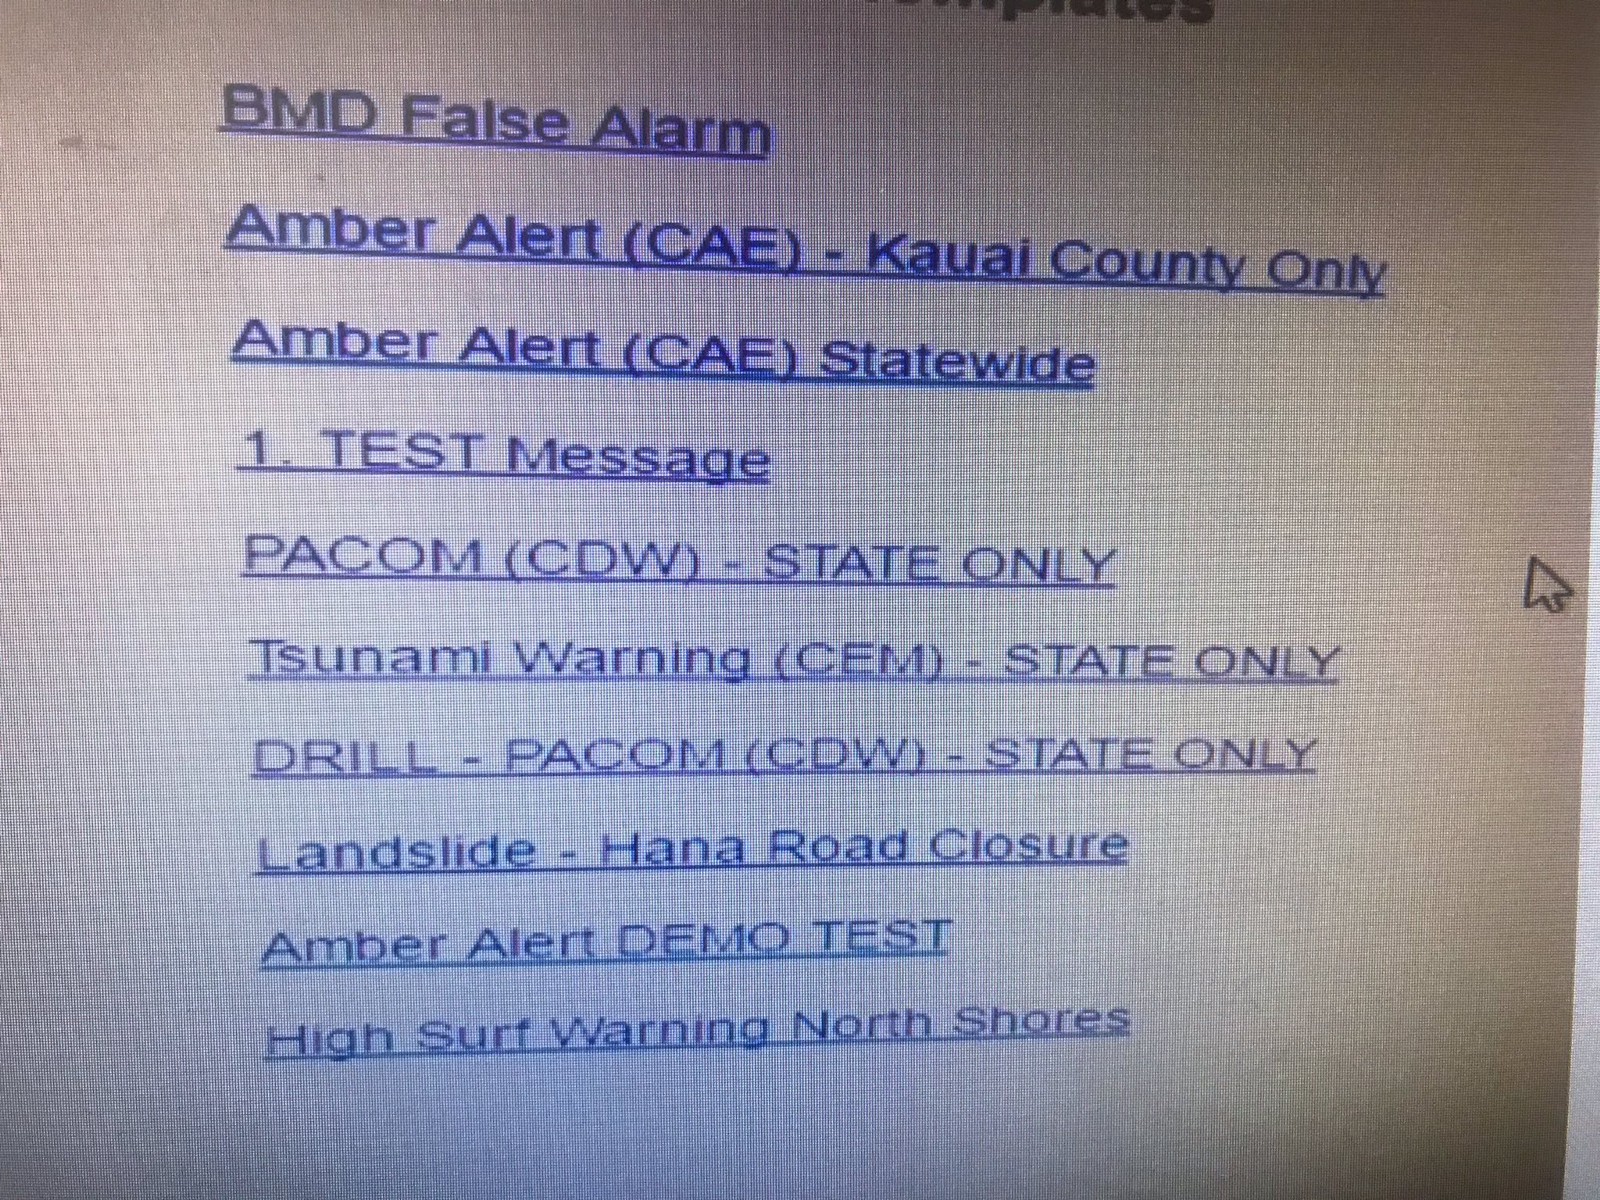 The state's Emergency Text File List